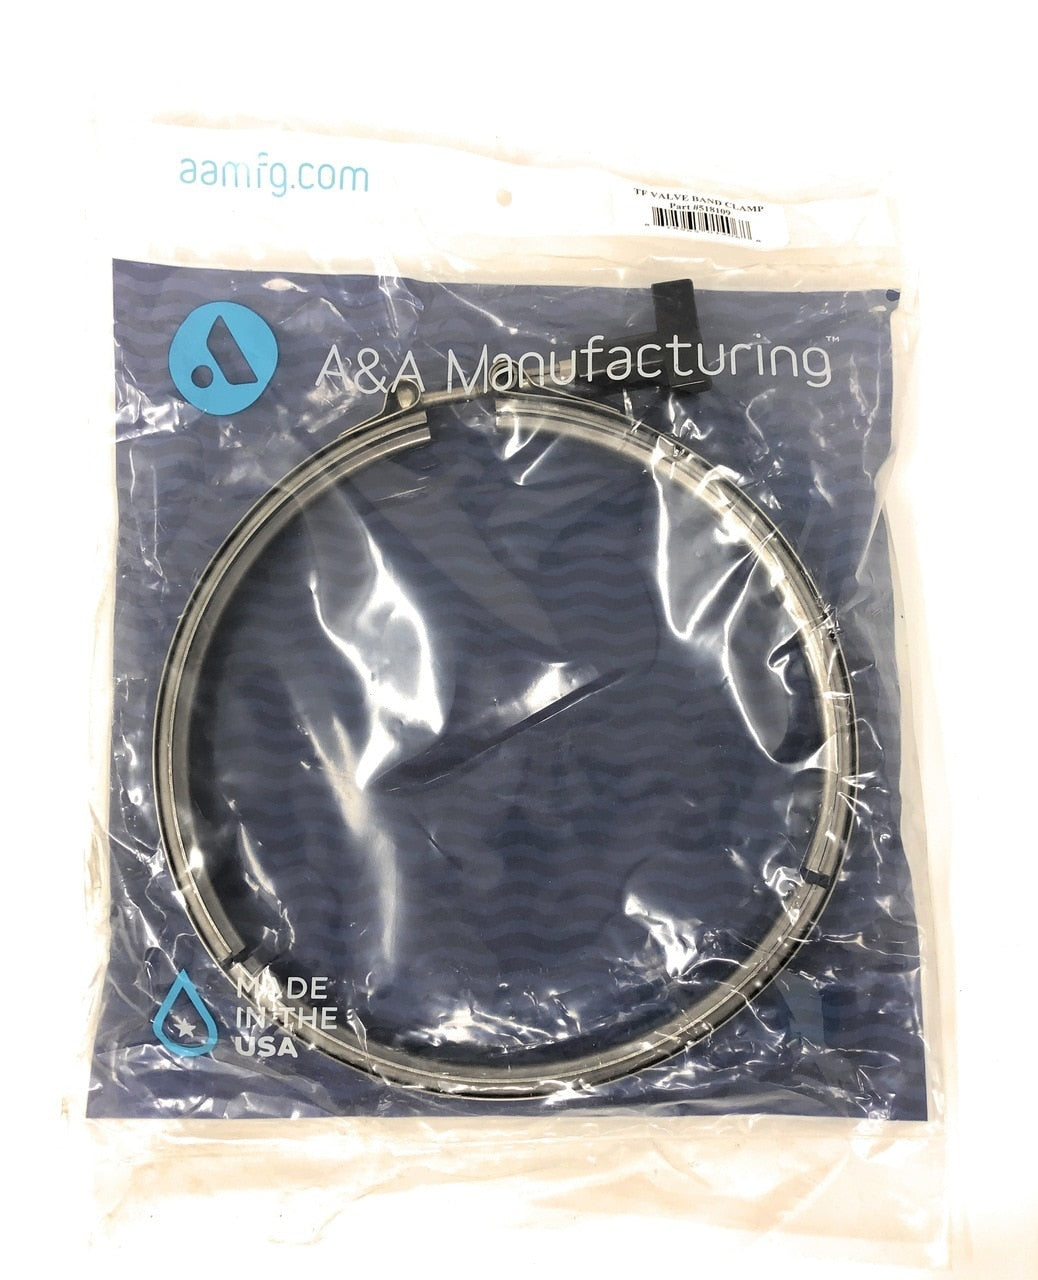 A&A Top Feed 5&6 Port Stainless Steel Band Clamp - OEM Packaging